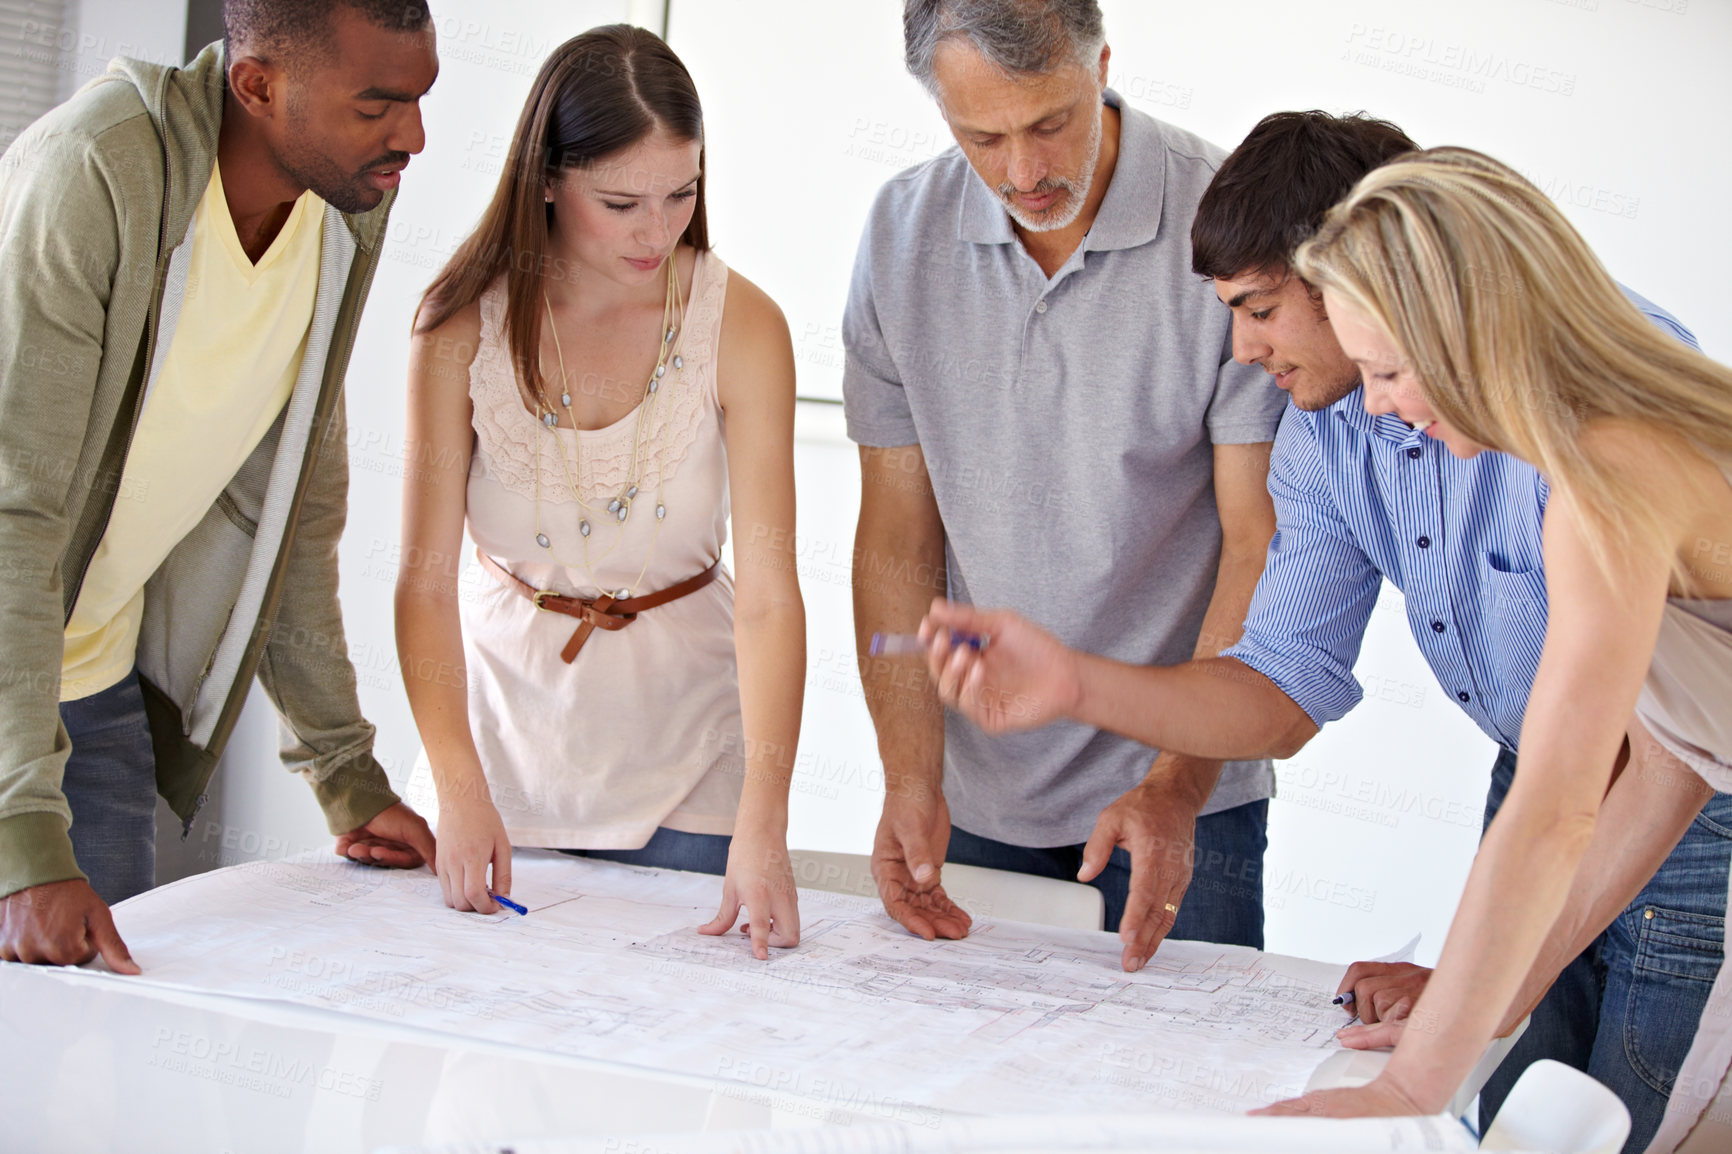 Buy stock photo A team of architects brainstorming in the boardroom over a set of blueprints